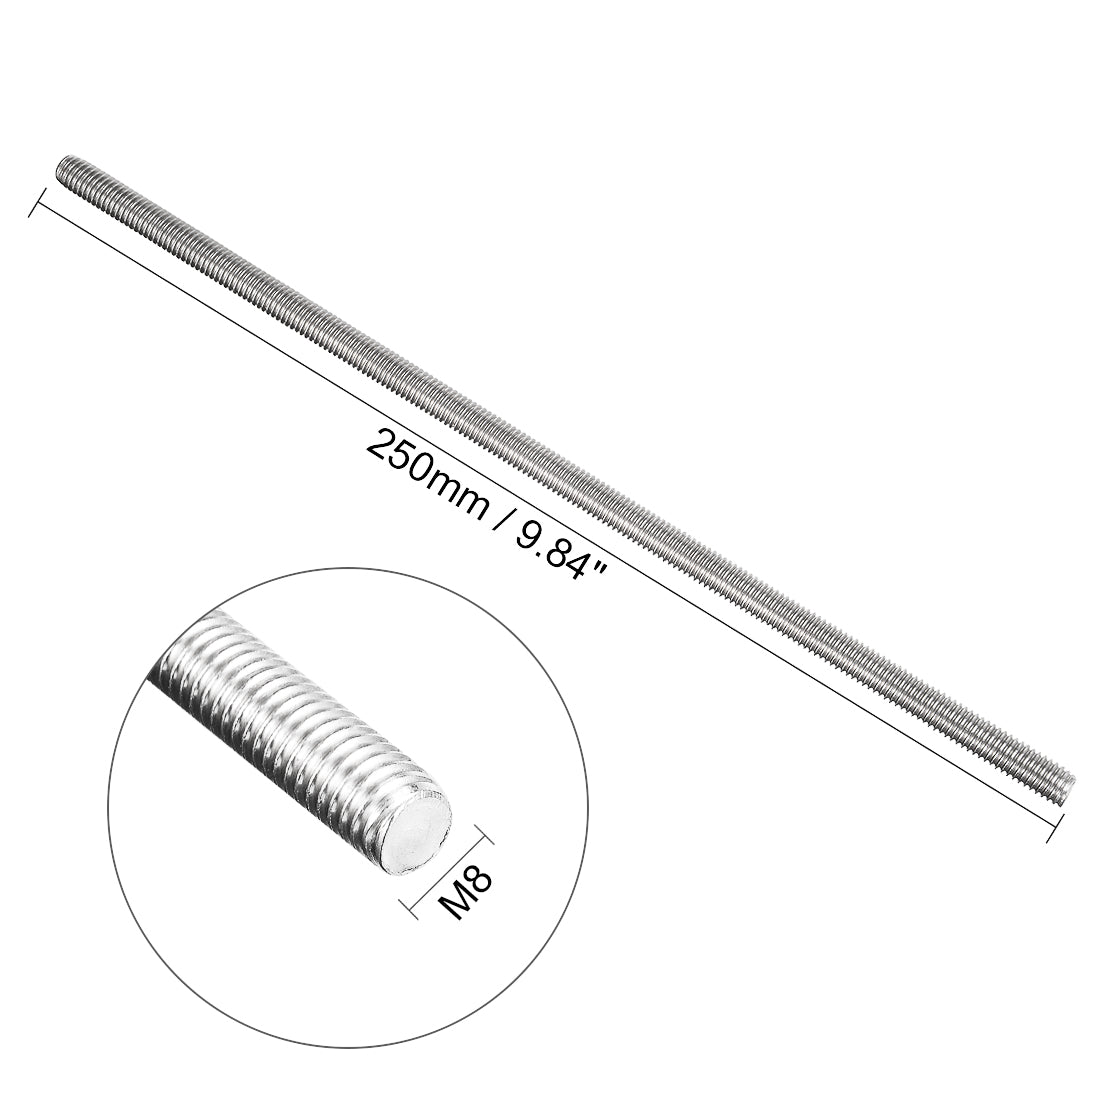 uxcell Uxcell M8 x 250mm Fully Threaded Rod 304 Stainless Steel Right Hand Threads